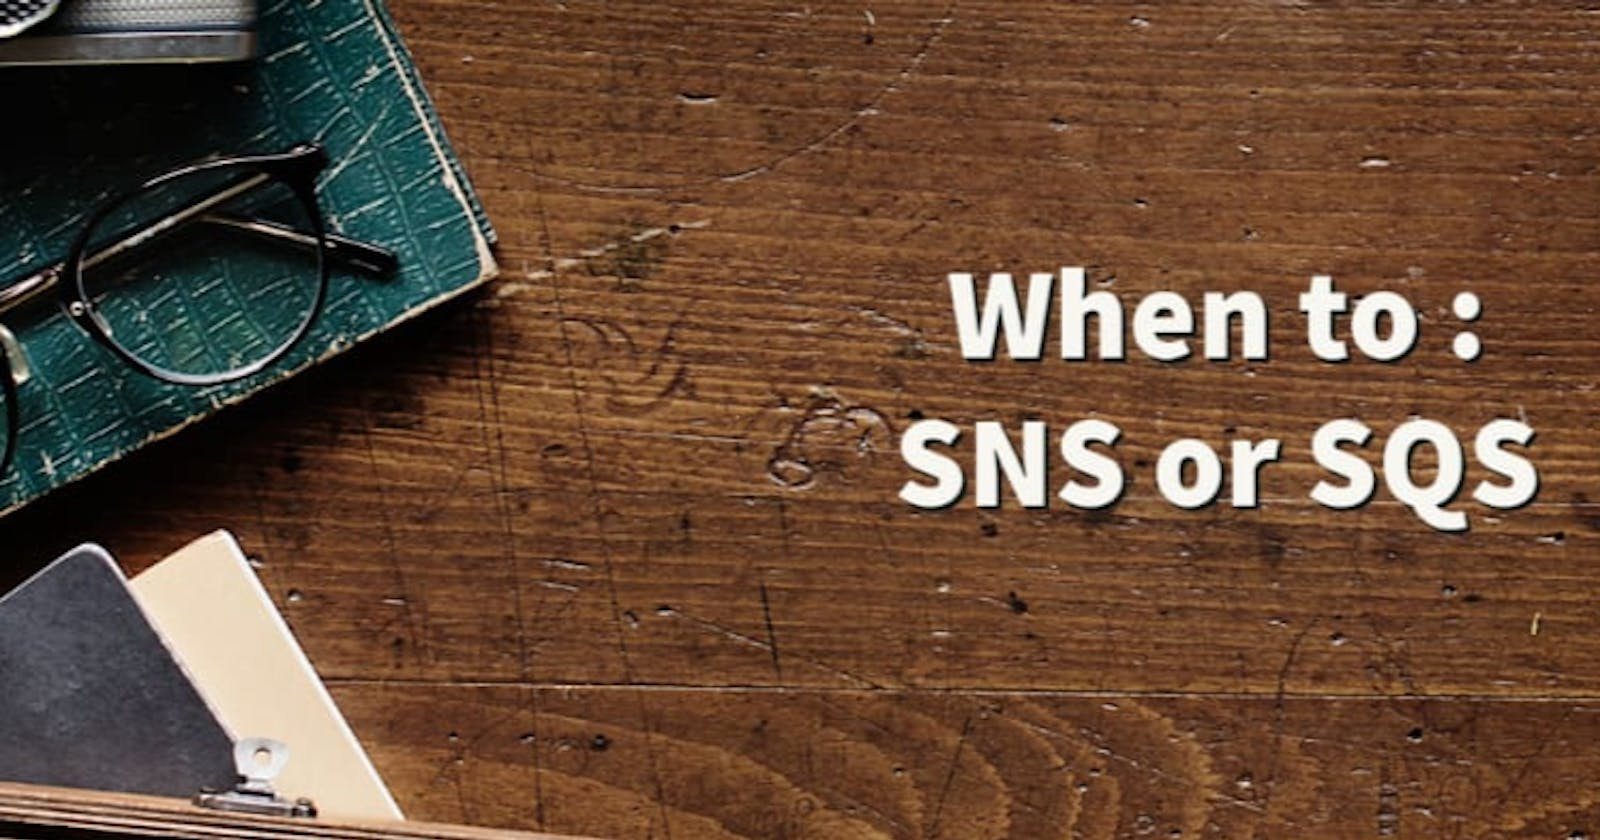 When to : SNS or SQS